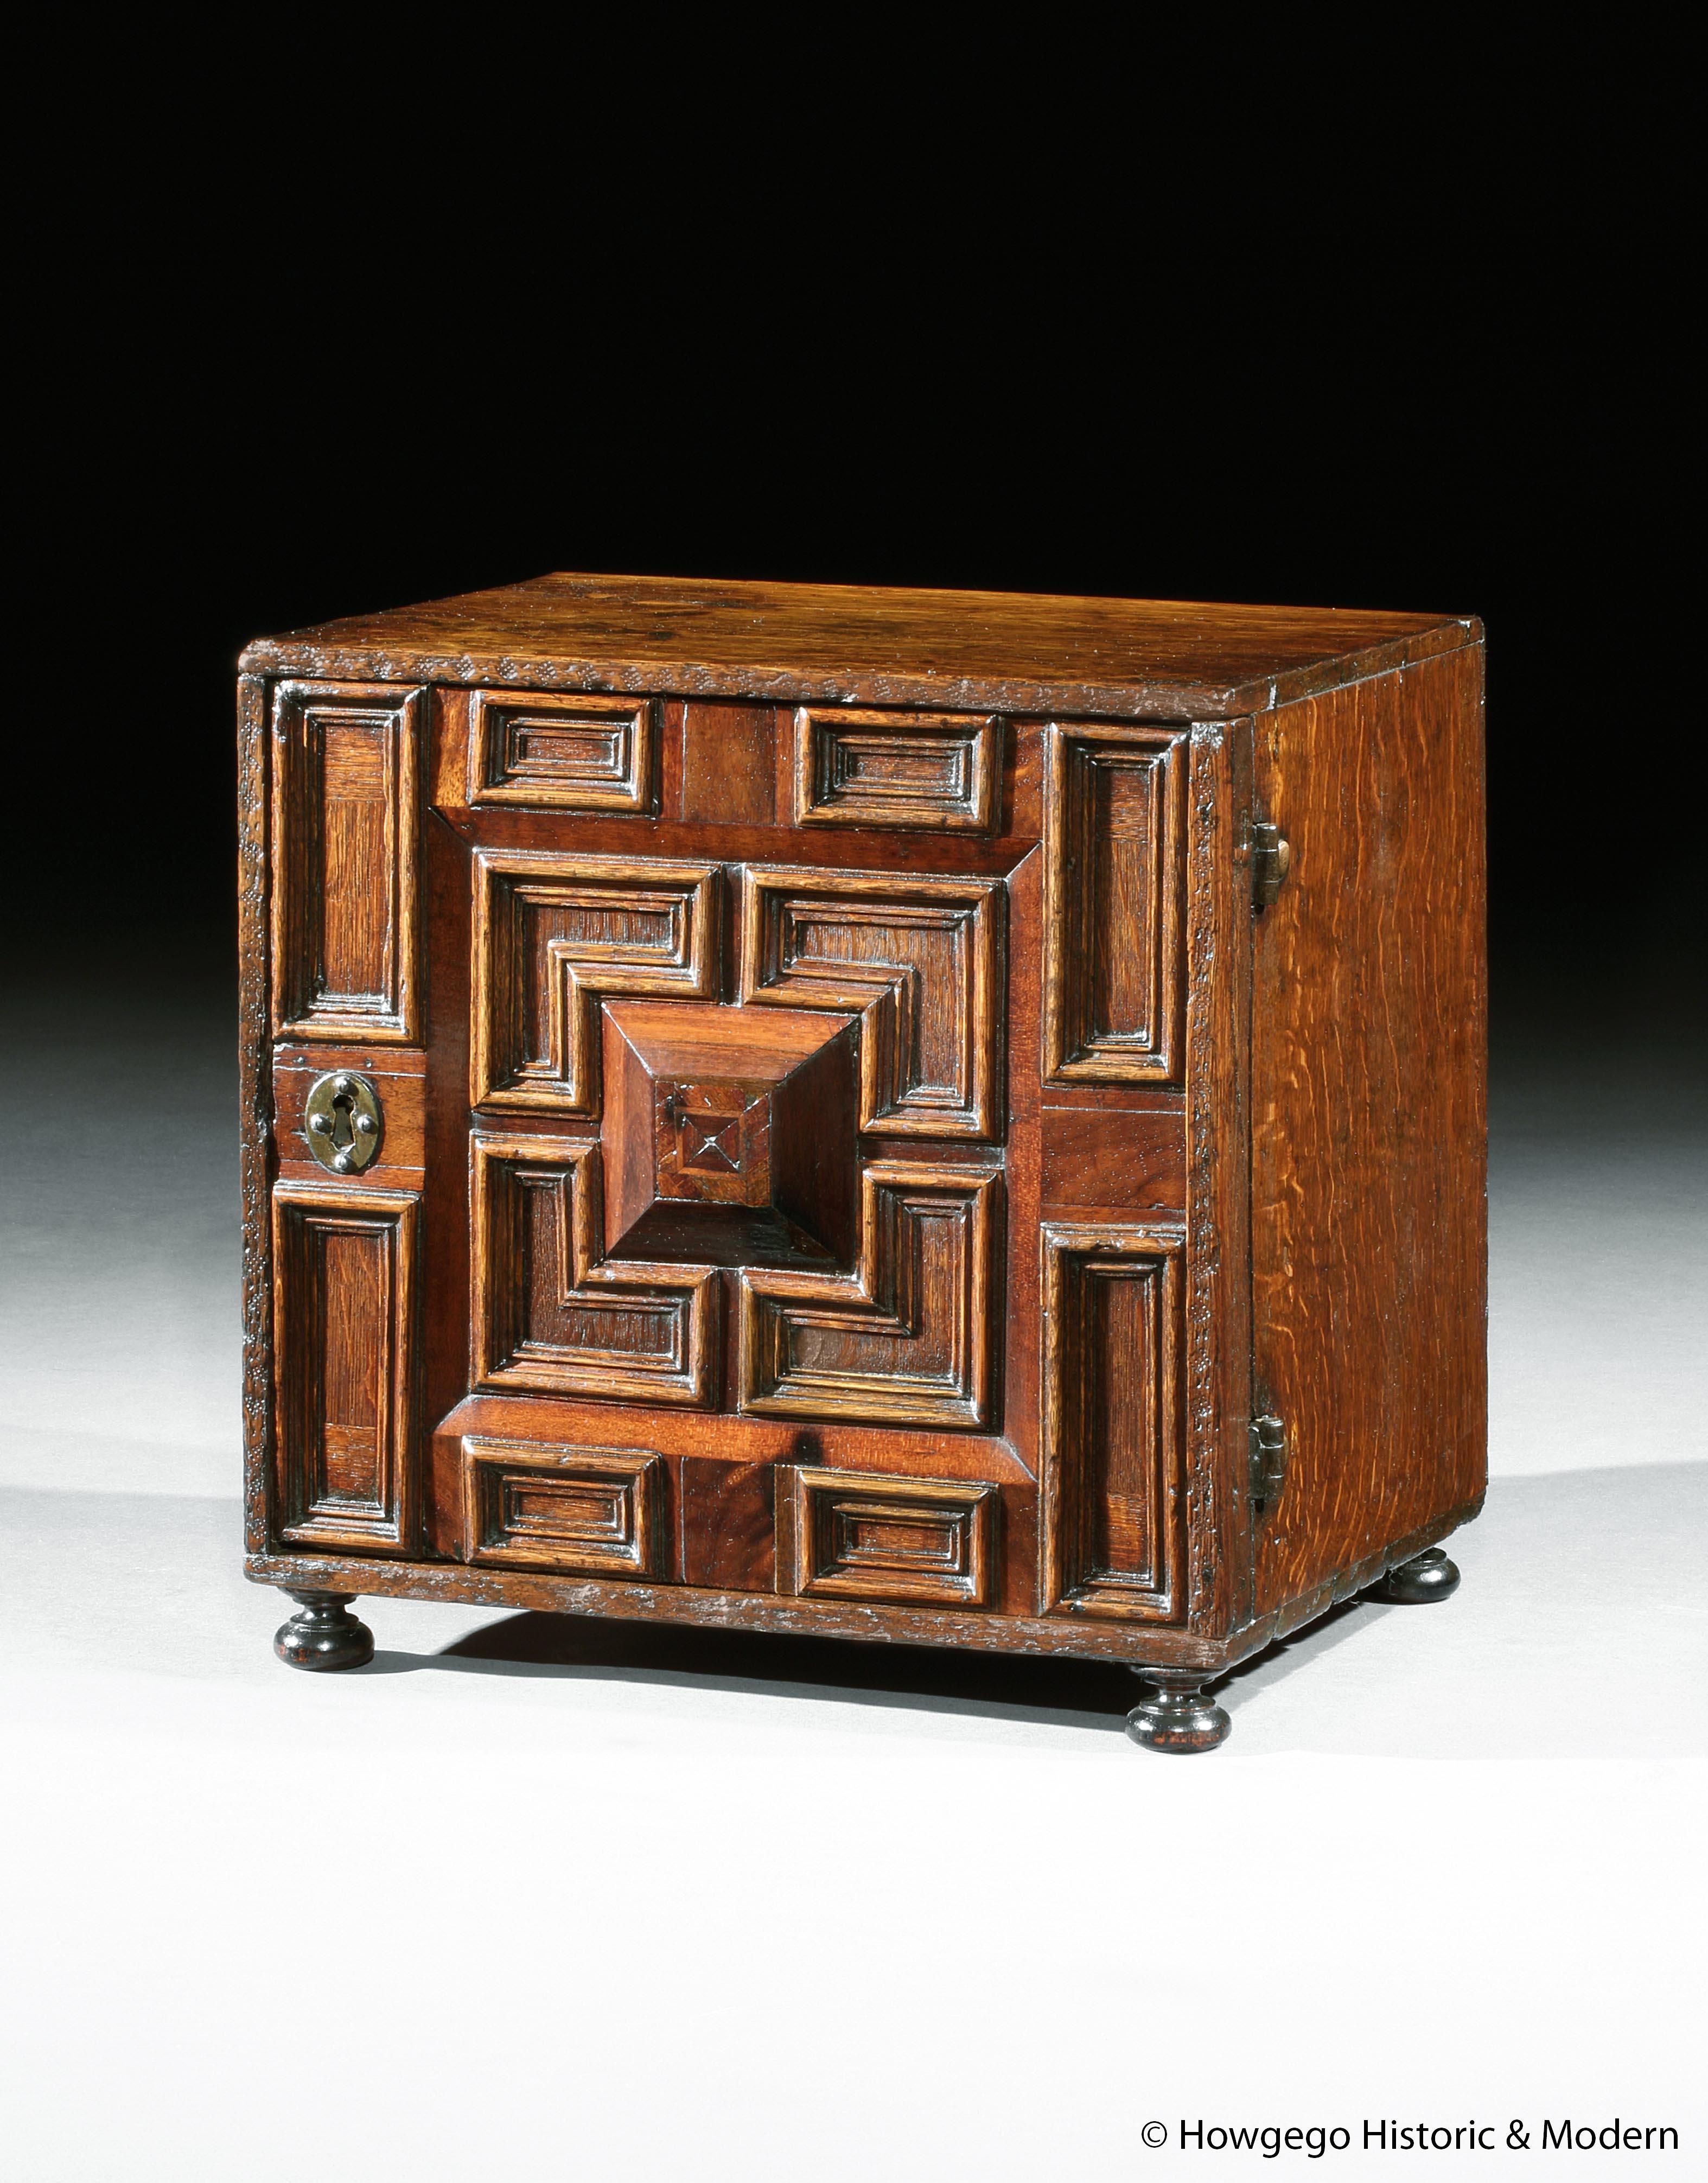 - Particularly fine example with deep cushion and geometric mouldings.
- Atmospheric piece with character
- Secret drawers add intrigue

A rare mid-17th century oak and cedar spice cabinet with geometric and cushion mouldings. The front with a